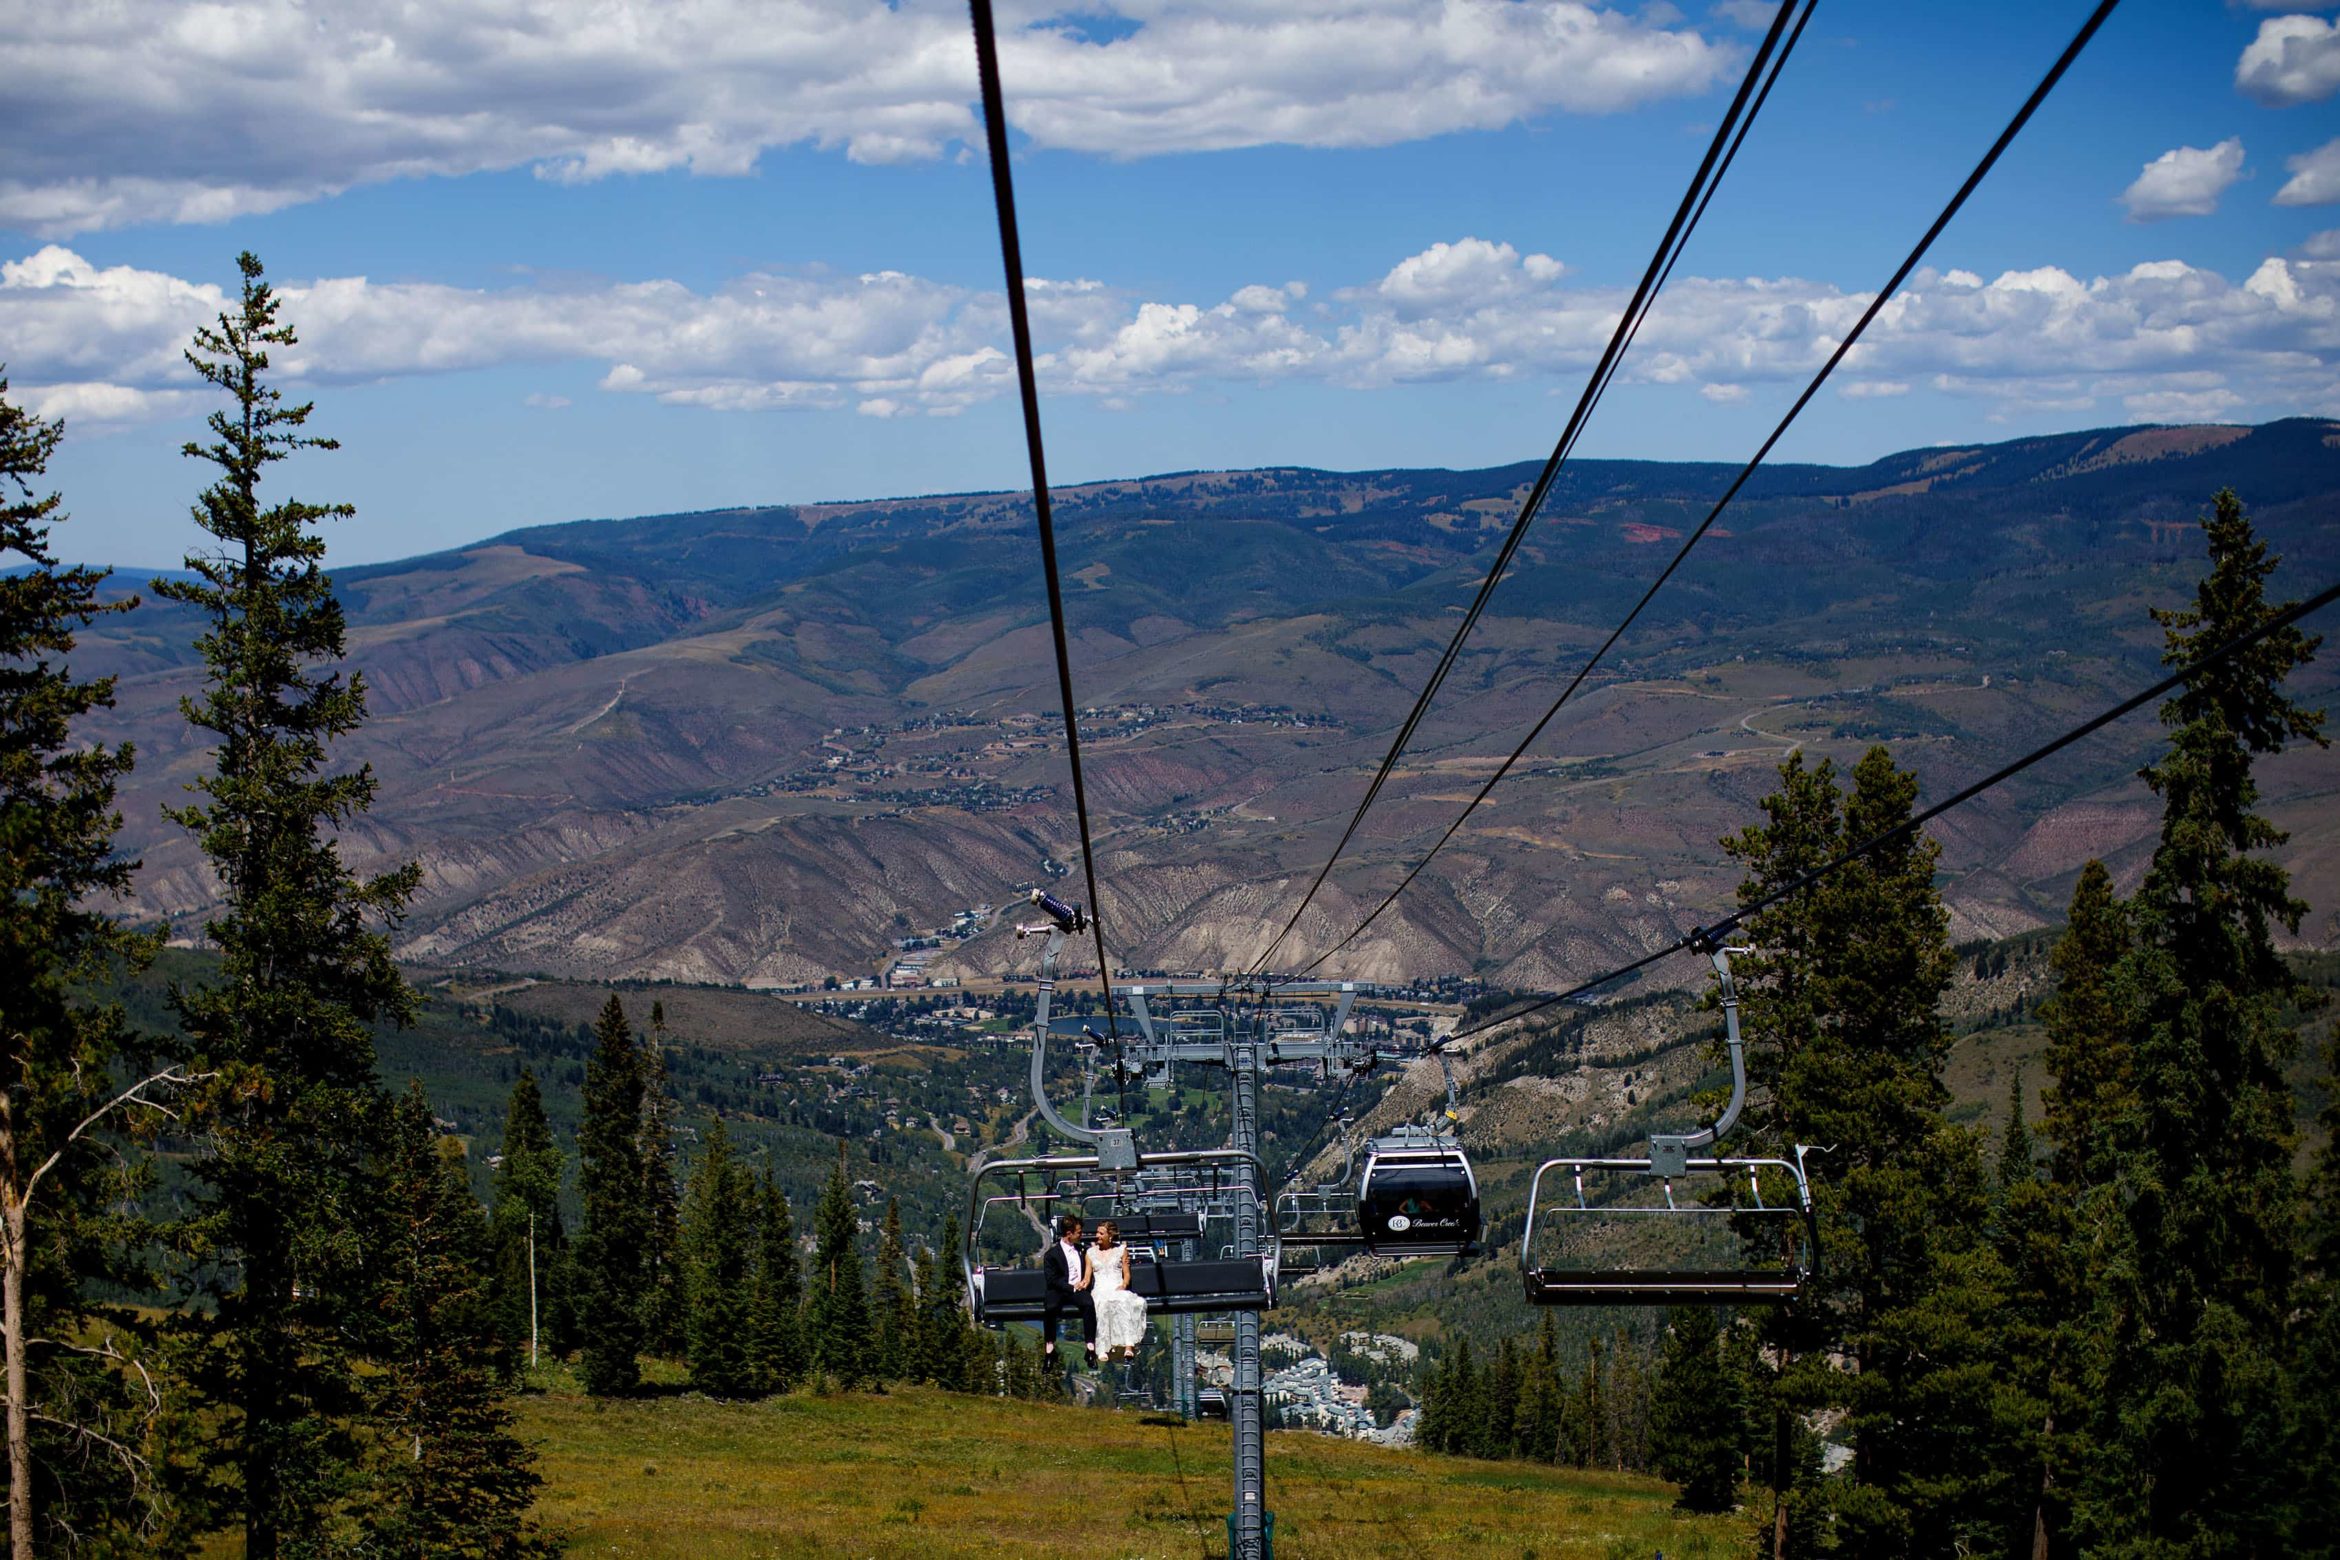 The bride and groom ride the Centennial Express chairlift on their wedding day in Beaver Creek